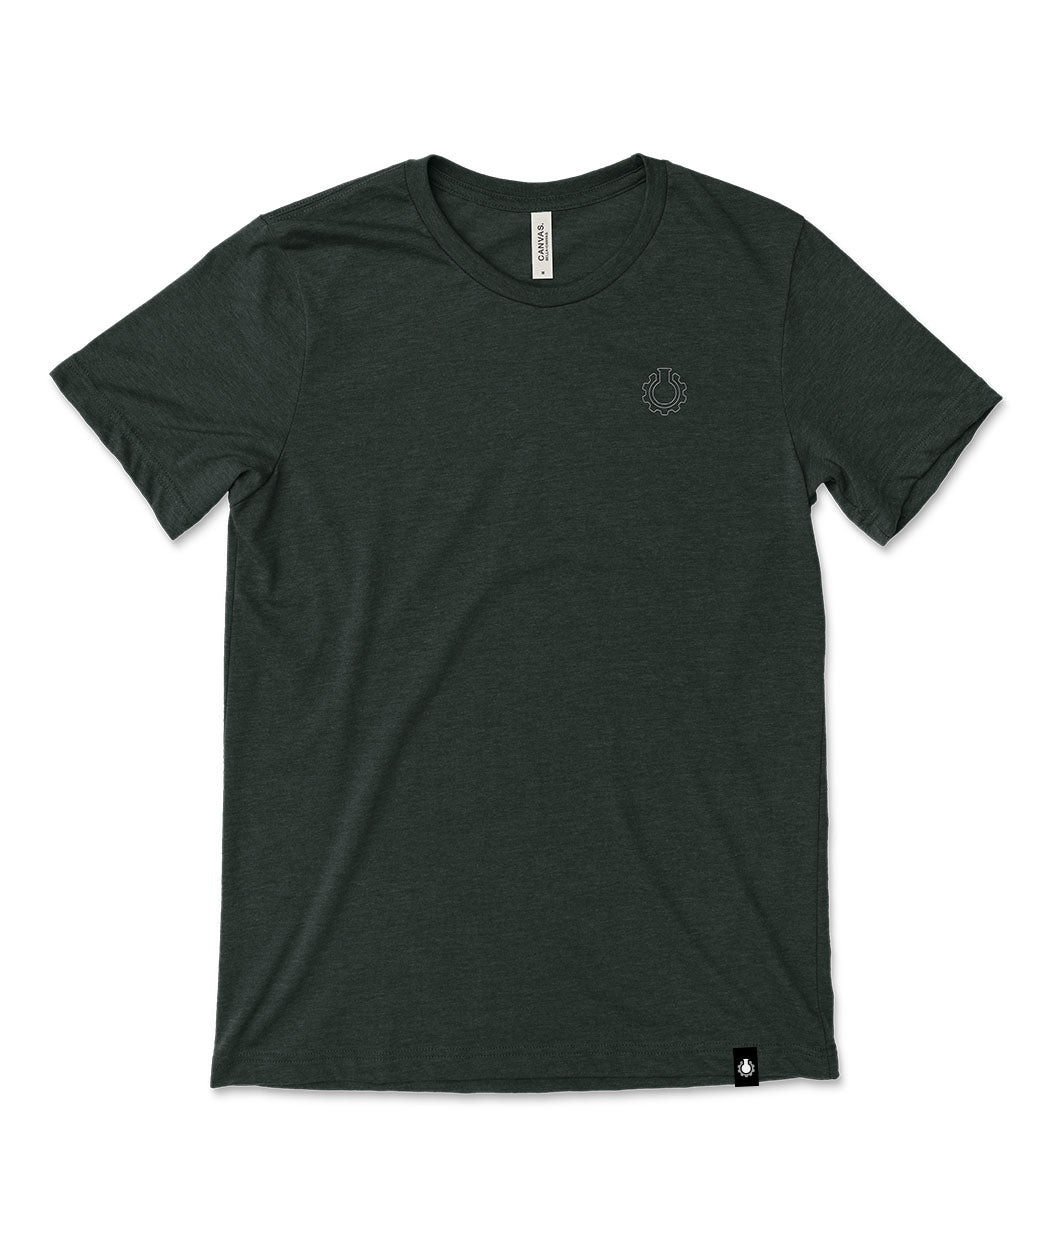 A dark green t-shirt with a small, subtle beaker logo from CGP Grey in the top left area of the shirt. 